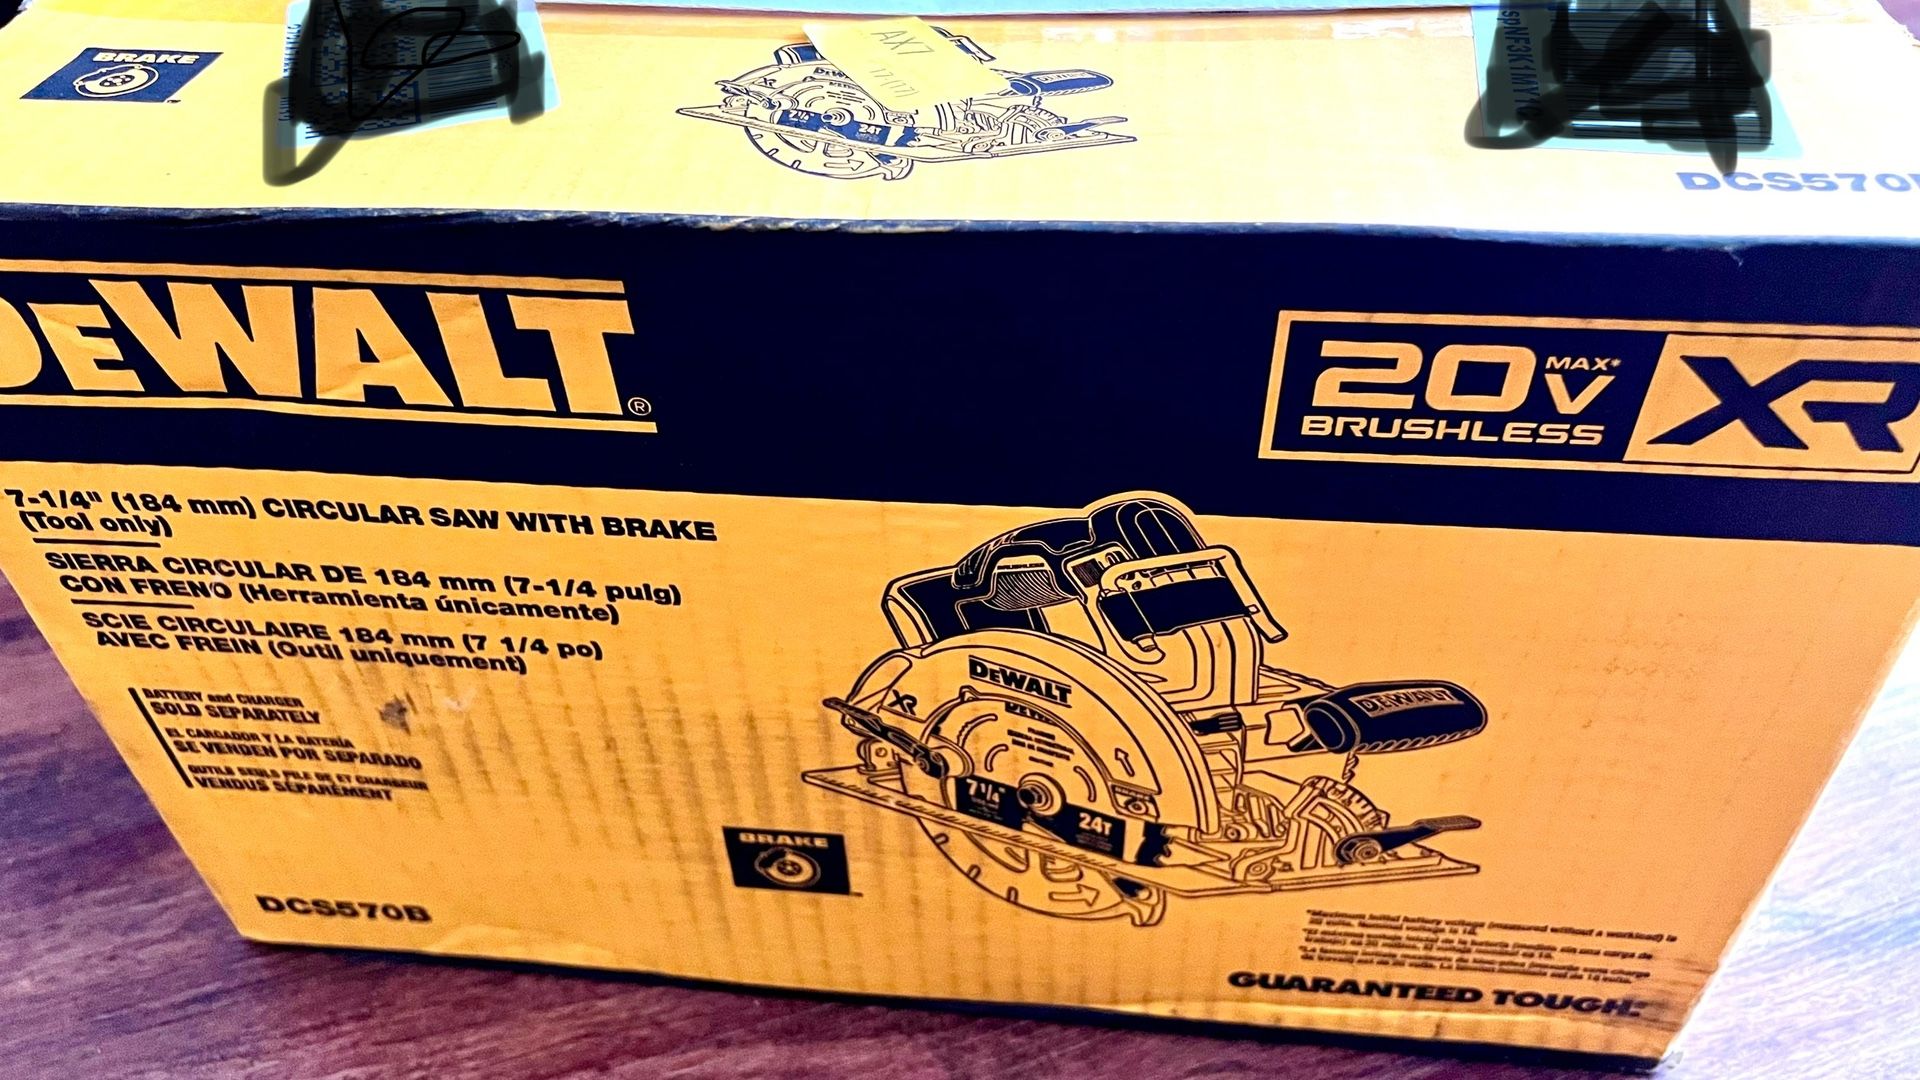 DEWALT 20V MAX* XR® BRUSHLESS 7-1/ 4" CIRCULAR SAW WITH POWER DETECT (Tool Only) (DCS574B)